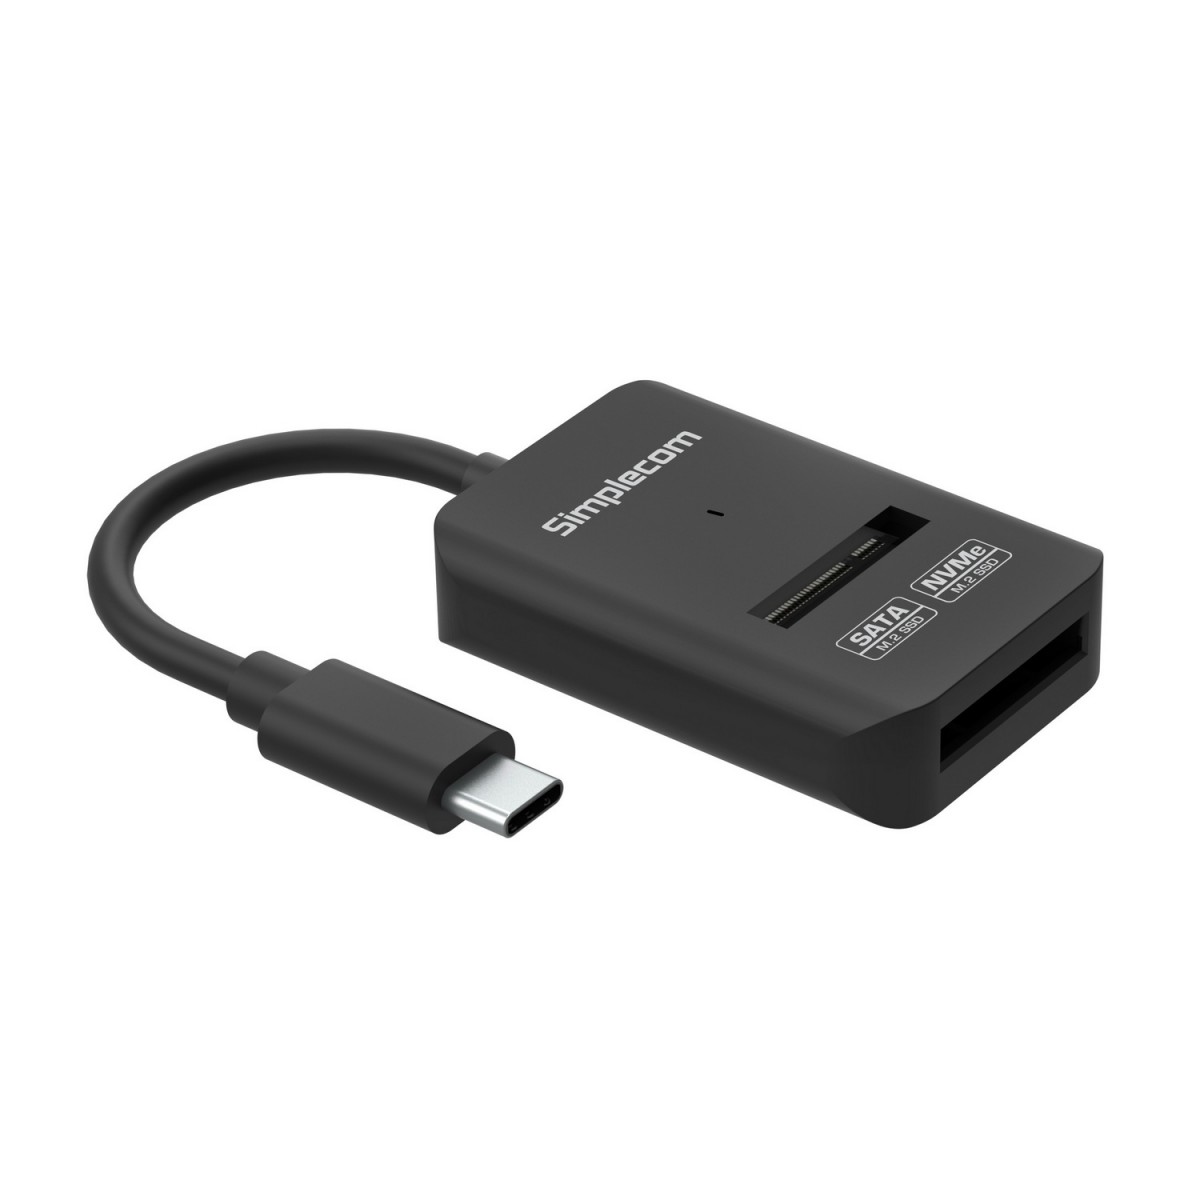  NVMe / SATA Dual Protocol M.2 SSD to USB-C Type-C Adapter Converter USB 3.2 Gen 2 10Gbps  